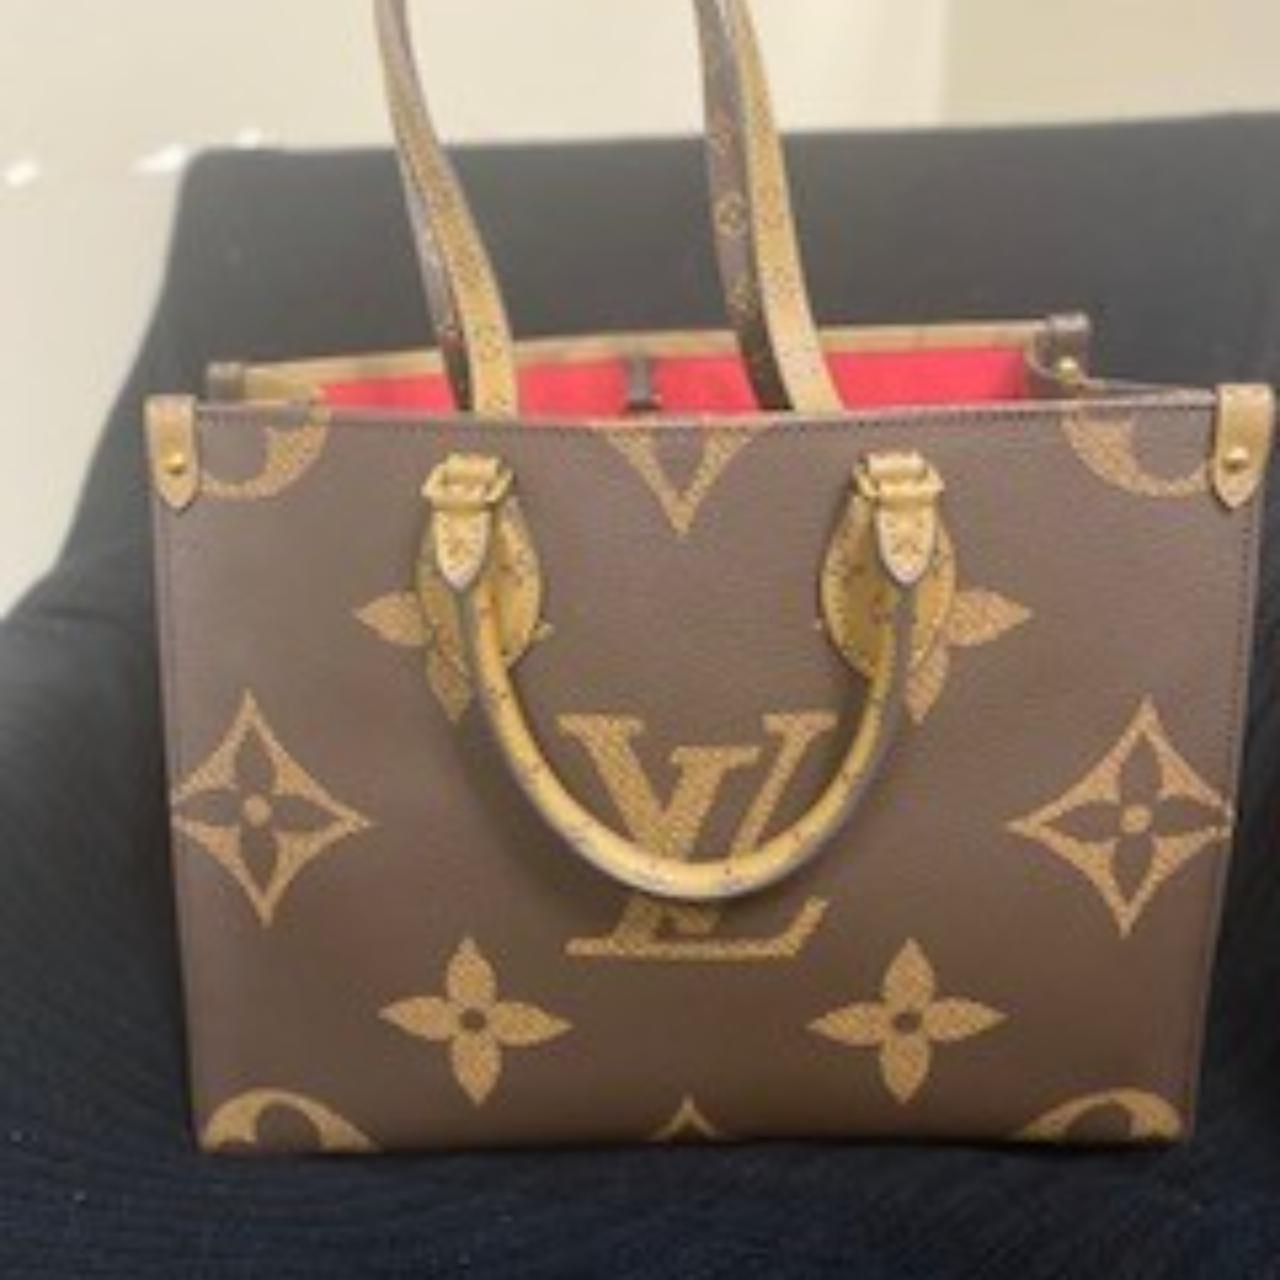 We guarantee this is an authentic Louis Vuitton - Depop